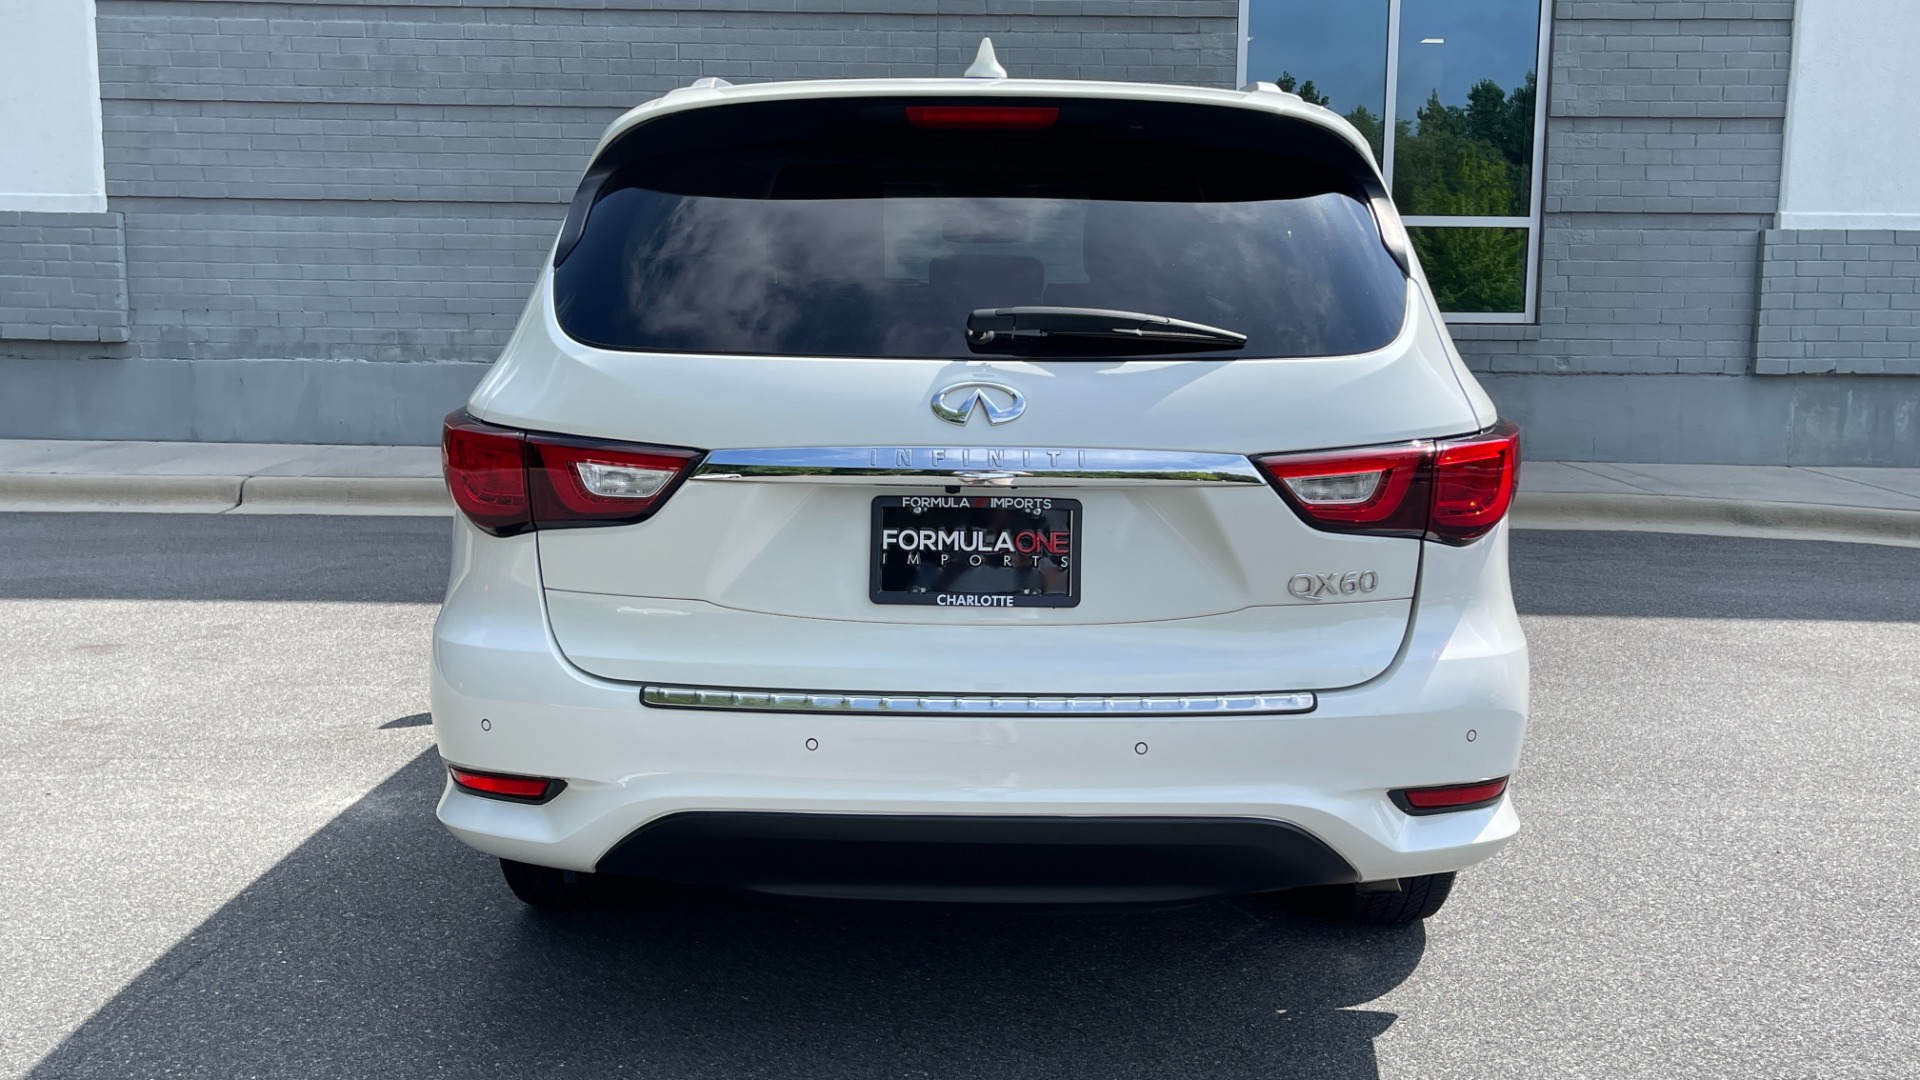 Used 2016 INFINITI QX60 AWD / DVD / 3RD ROW SEATS / DELUXE TECH for sale $27,999 at Formula Imports in Charlotte NC 28227 5